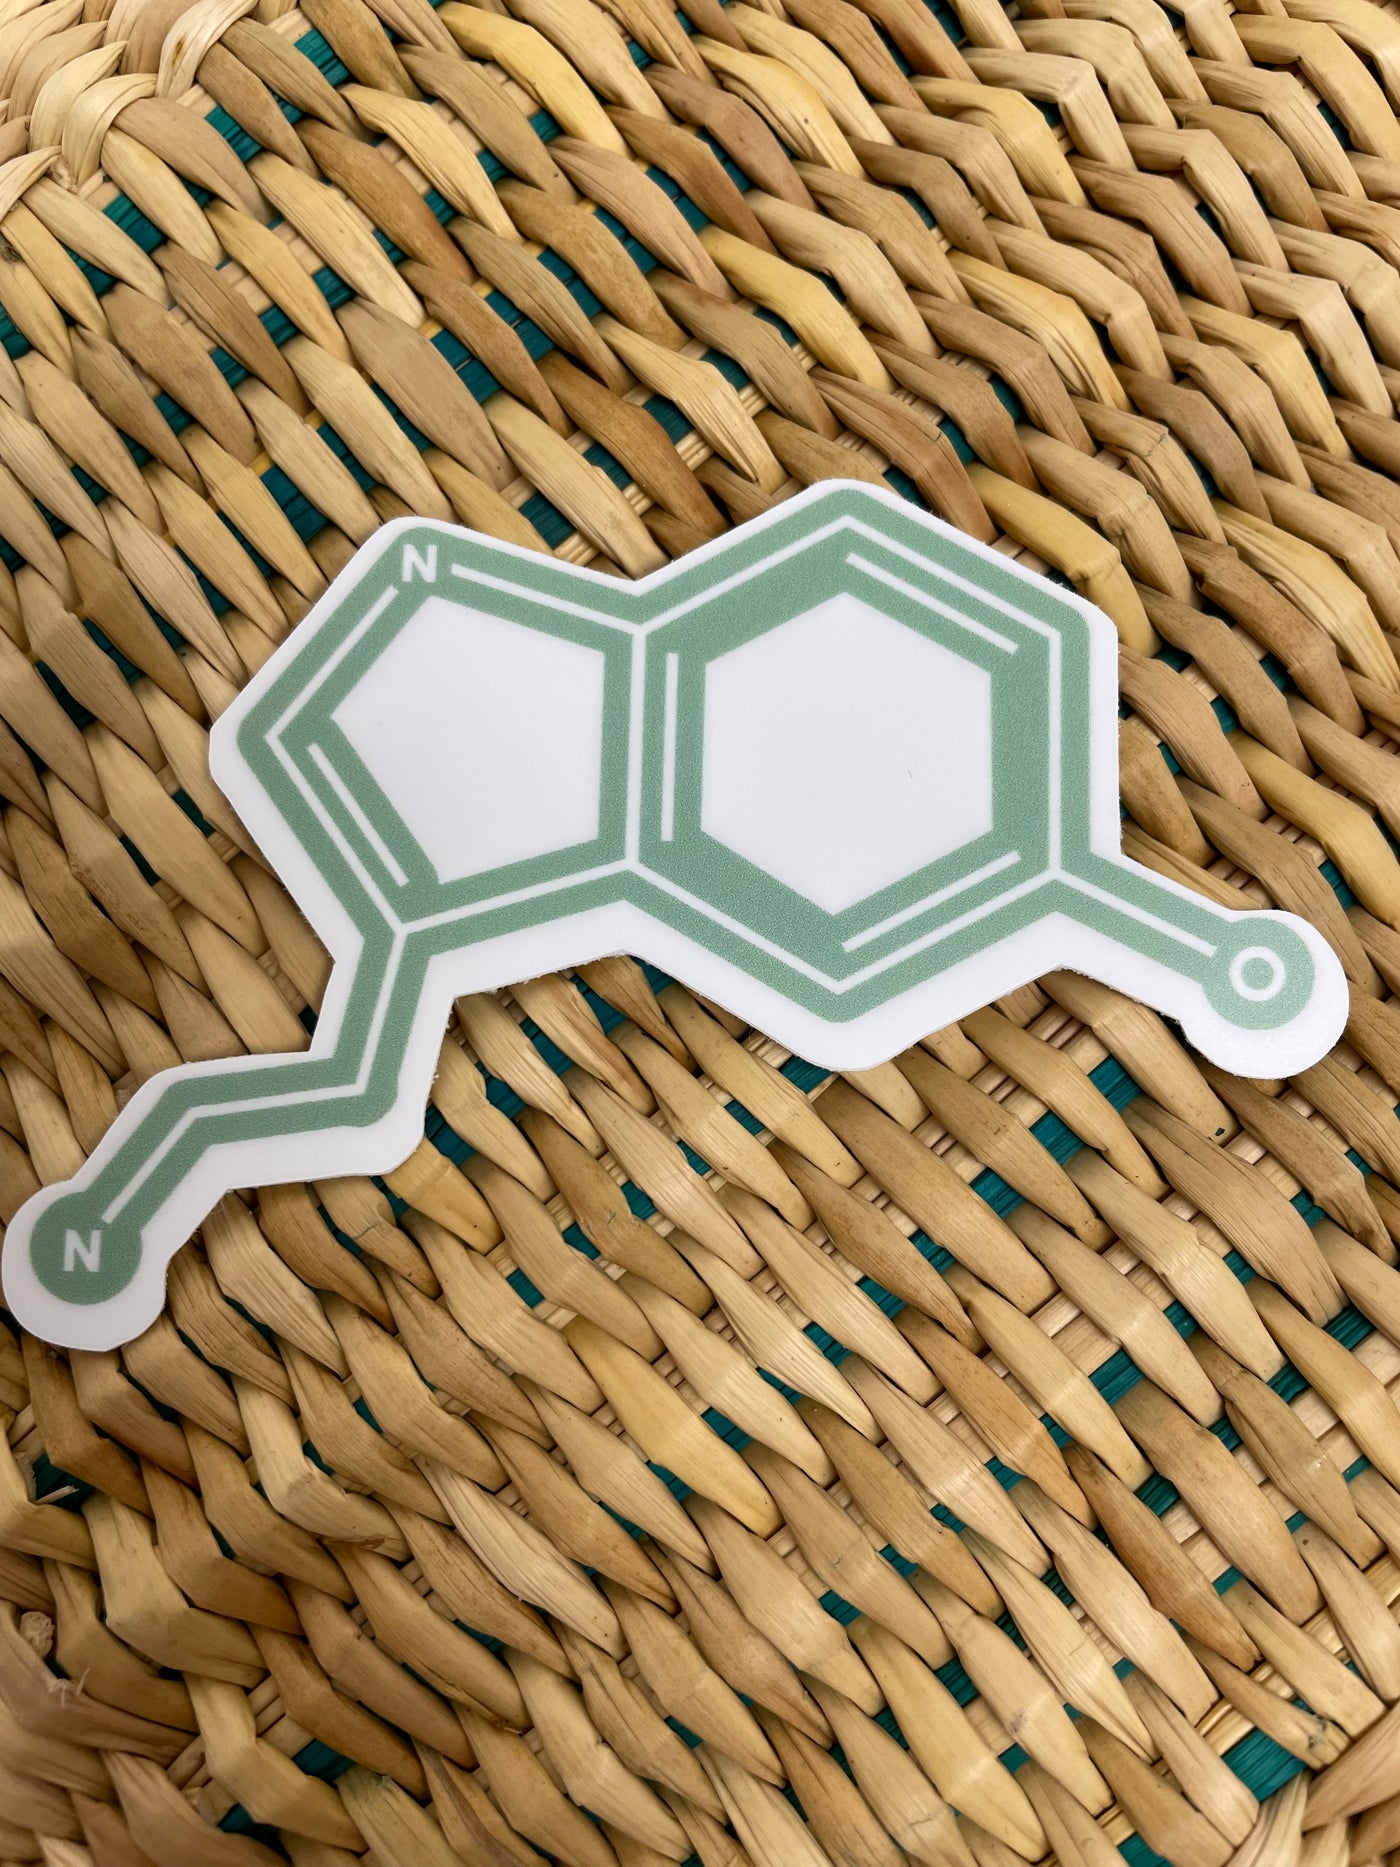 Organic chemical structure of serotonin sticker happiness chemical